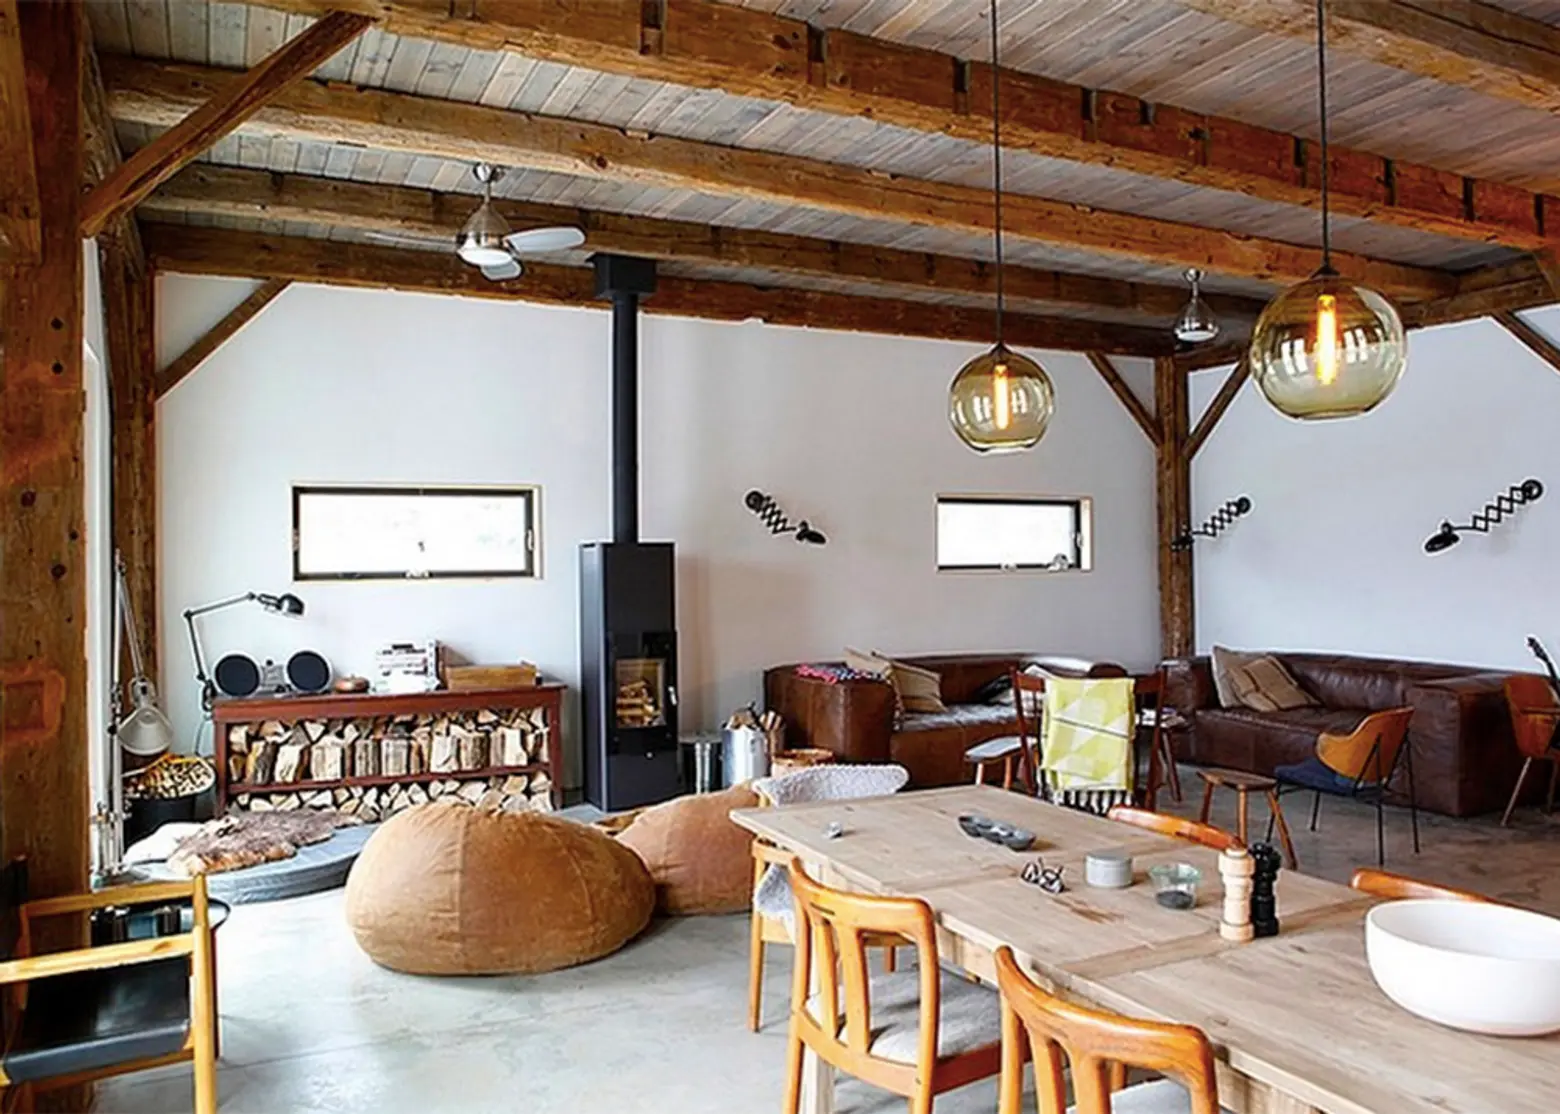 The Bovina Residence: A 19th-Century Wooden Barn Gets a 21st-Century Upgrade